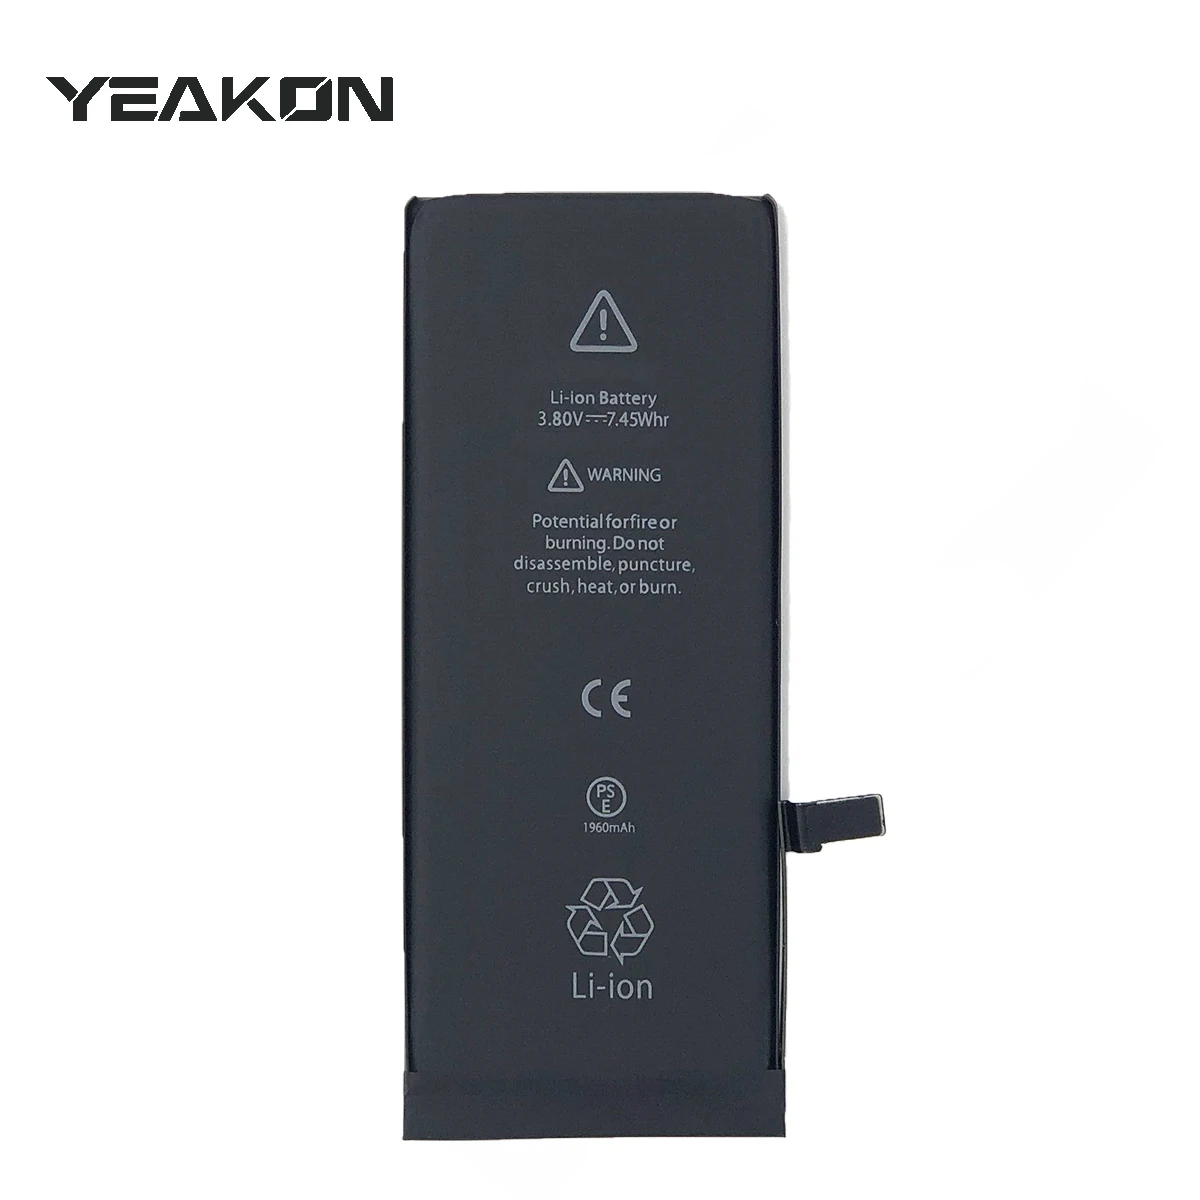 

YEAKON 7 7G Battery Batteries Replacement For iPhone 5 5S 5C SE 6 6S 6P 6SP 7G 7P 8G 8P X XS MAX XR 11 Pro MAX 12 Pro MAX